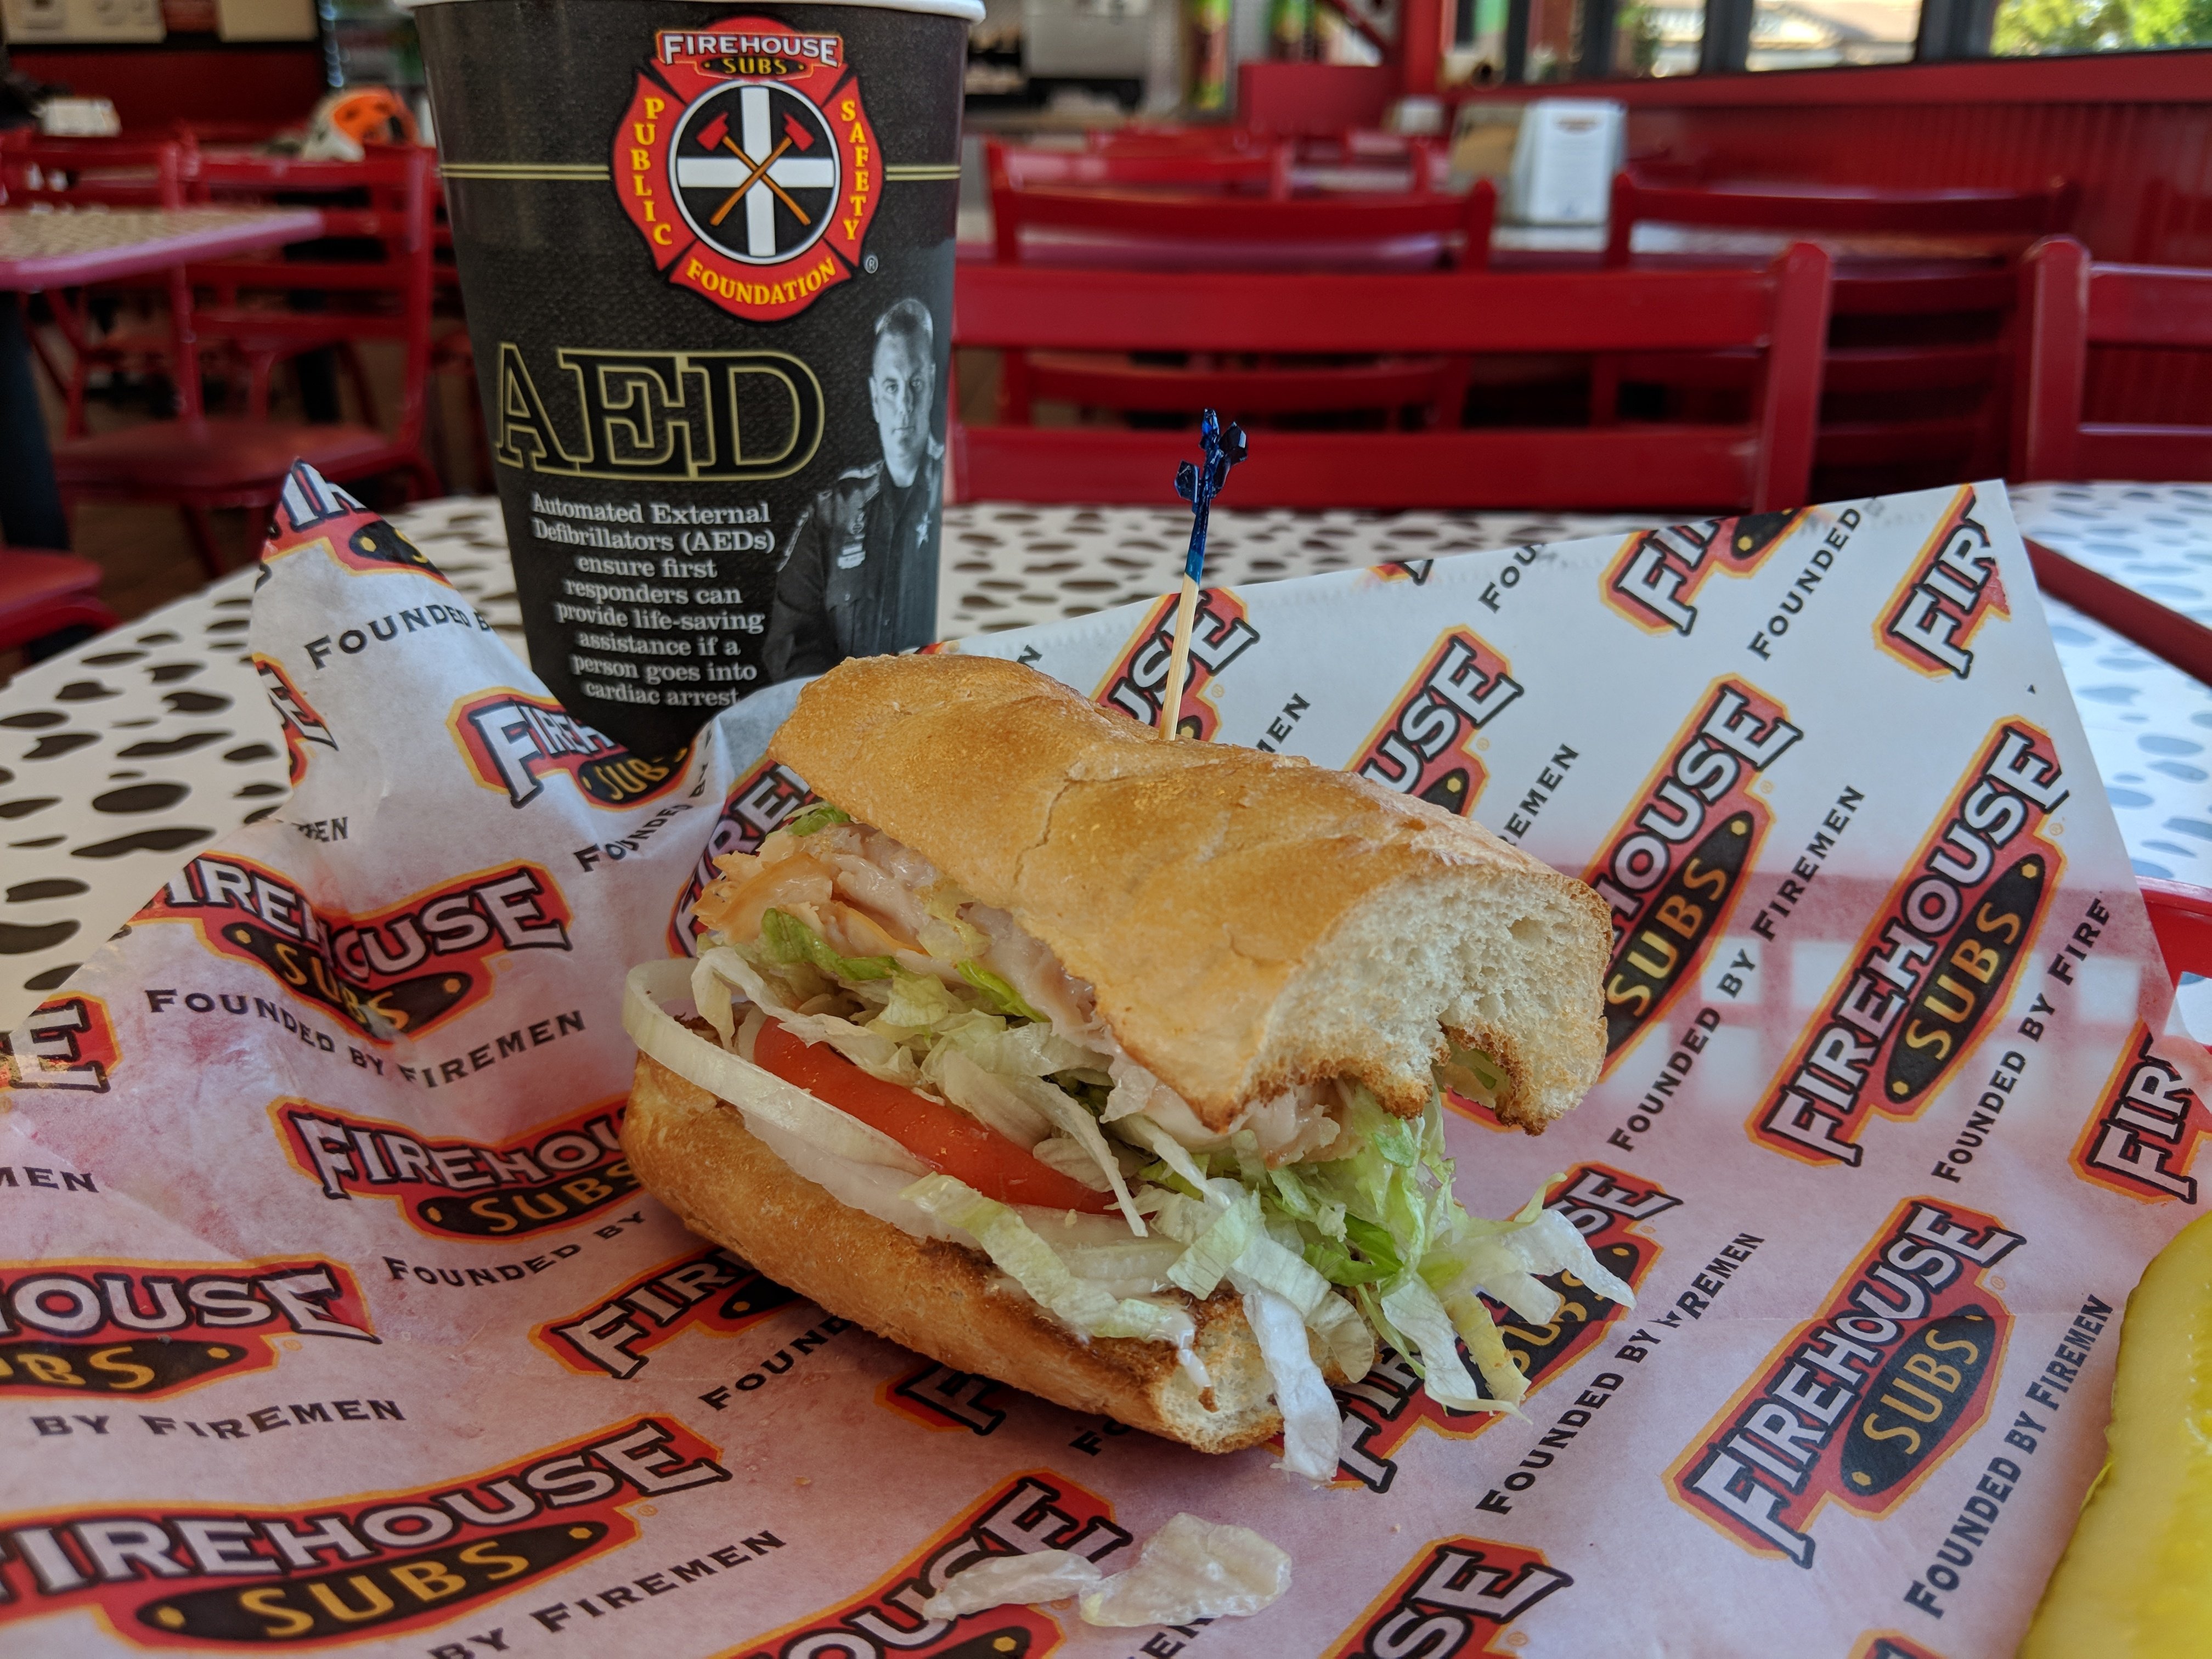 mike's firehouse subs